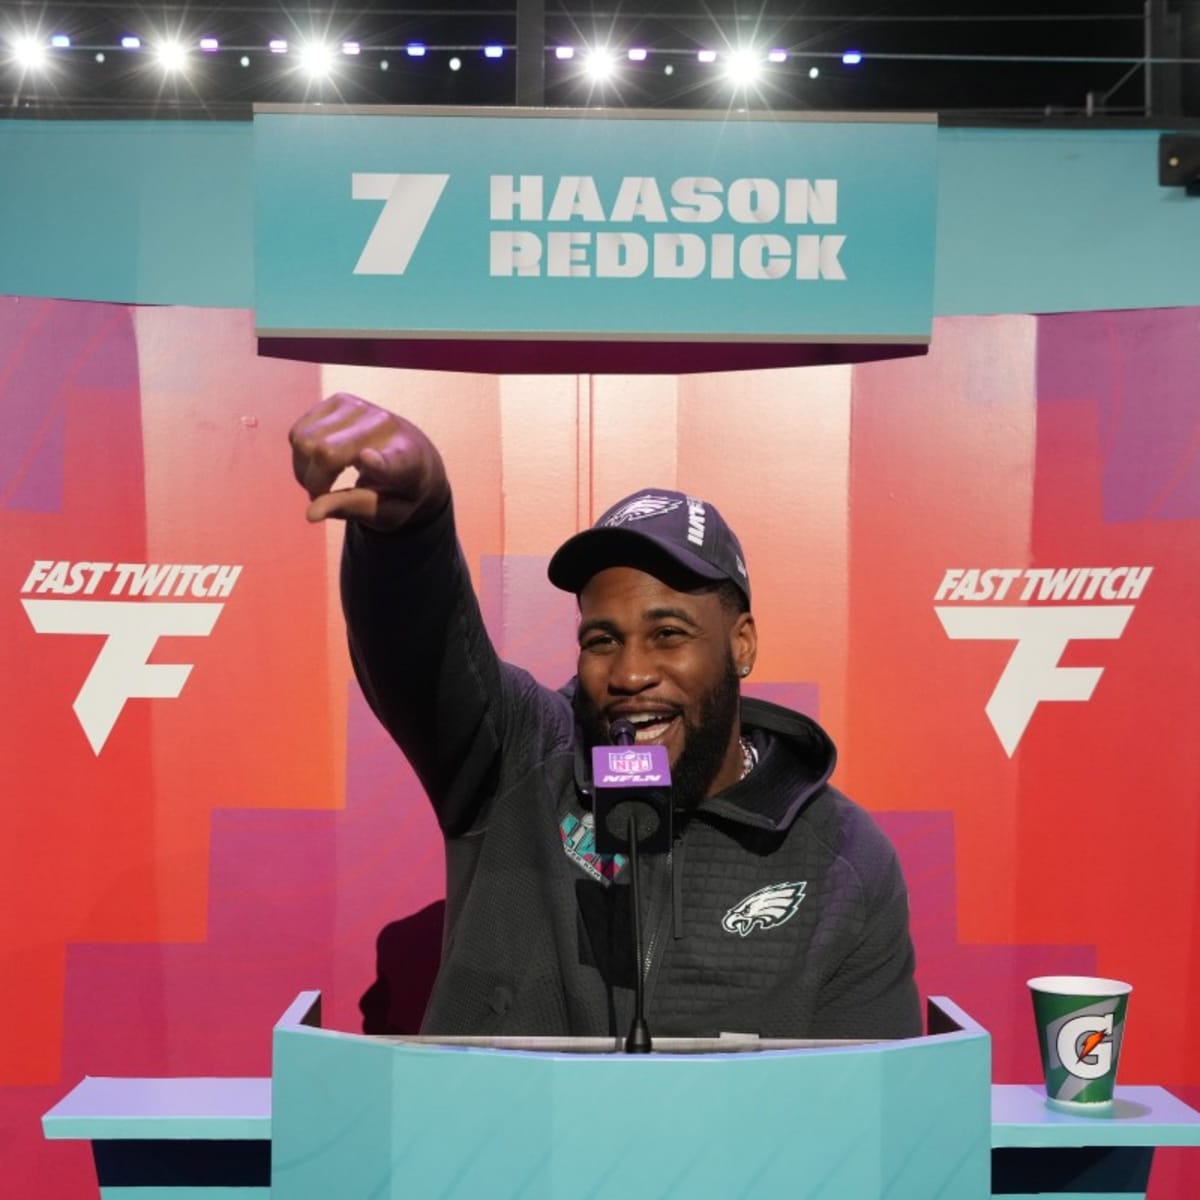 Super Bowl LVII is All About Family for Haason Reddick - Sports